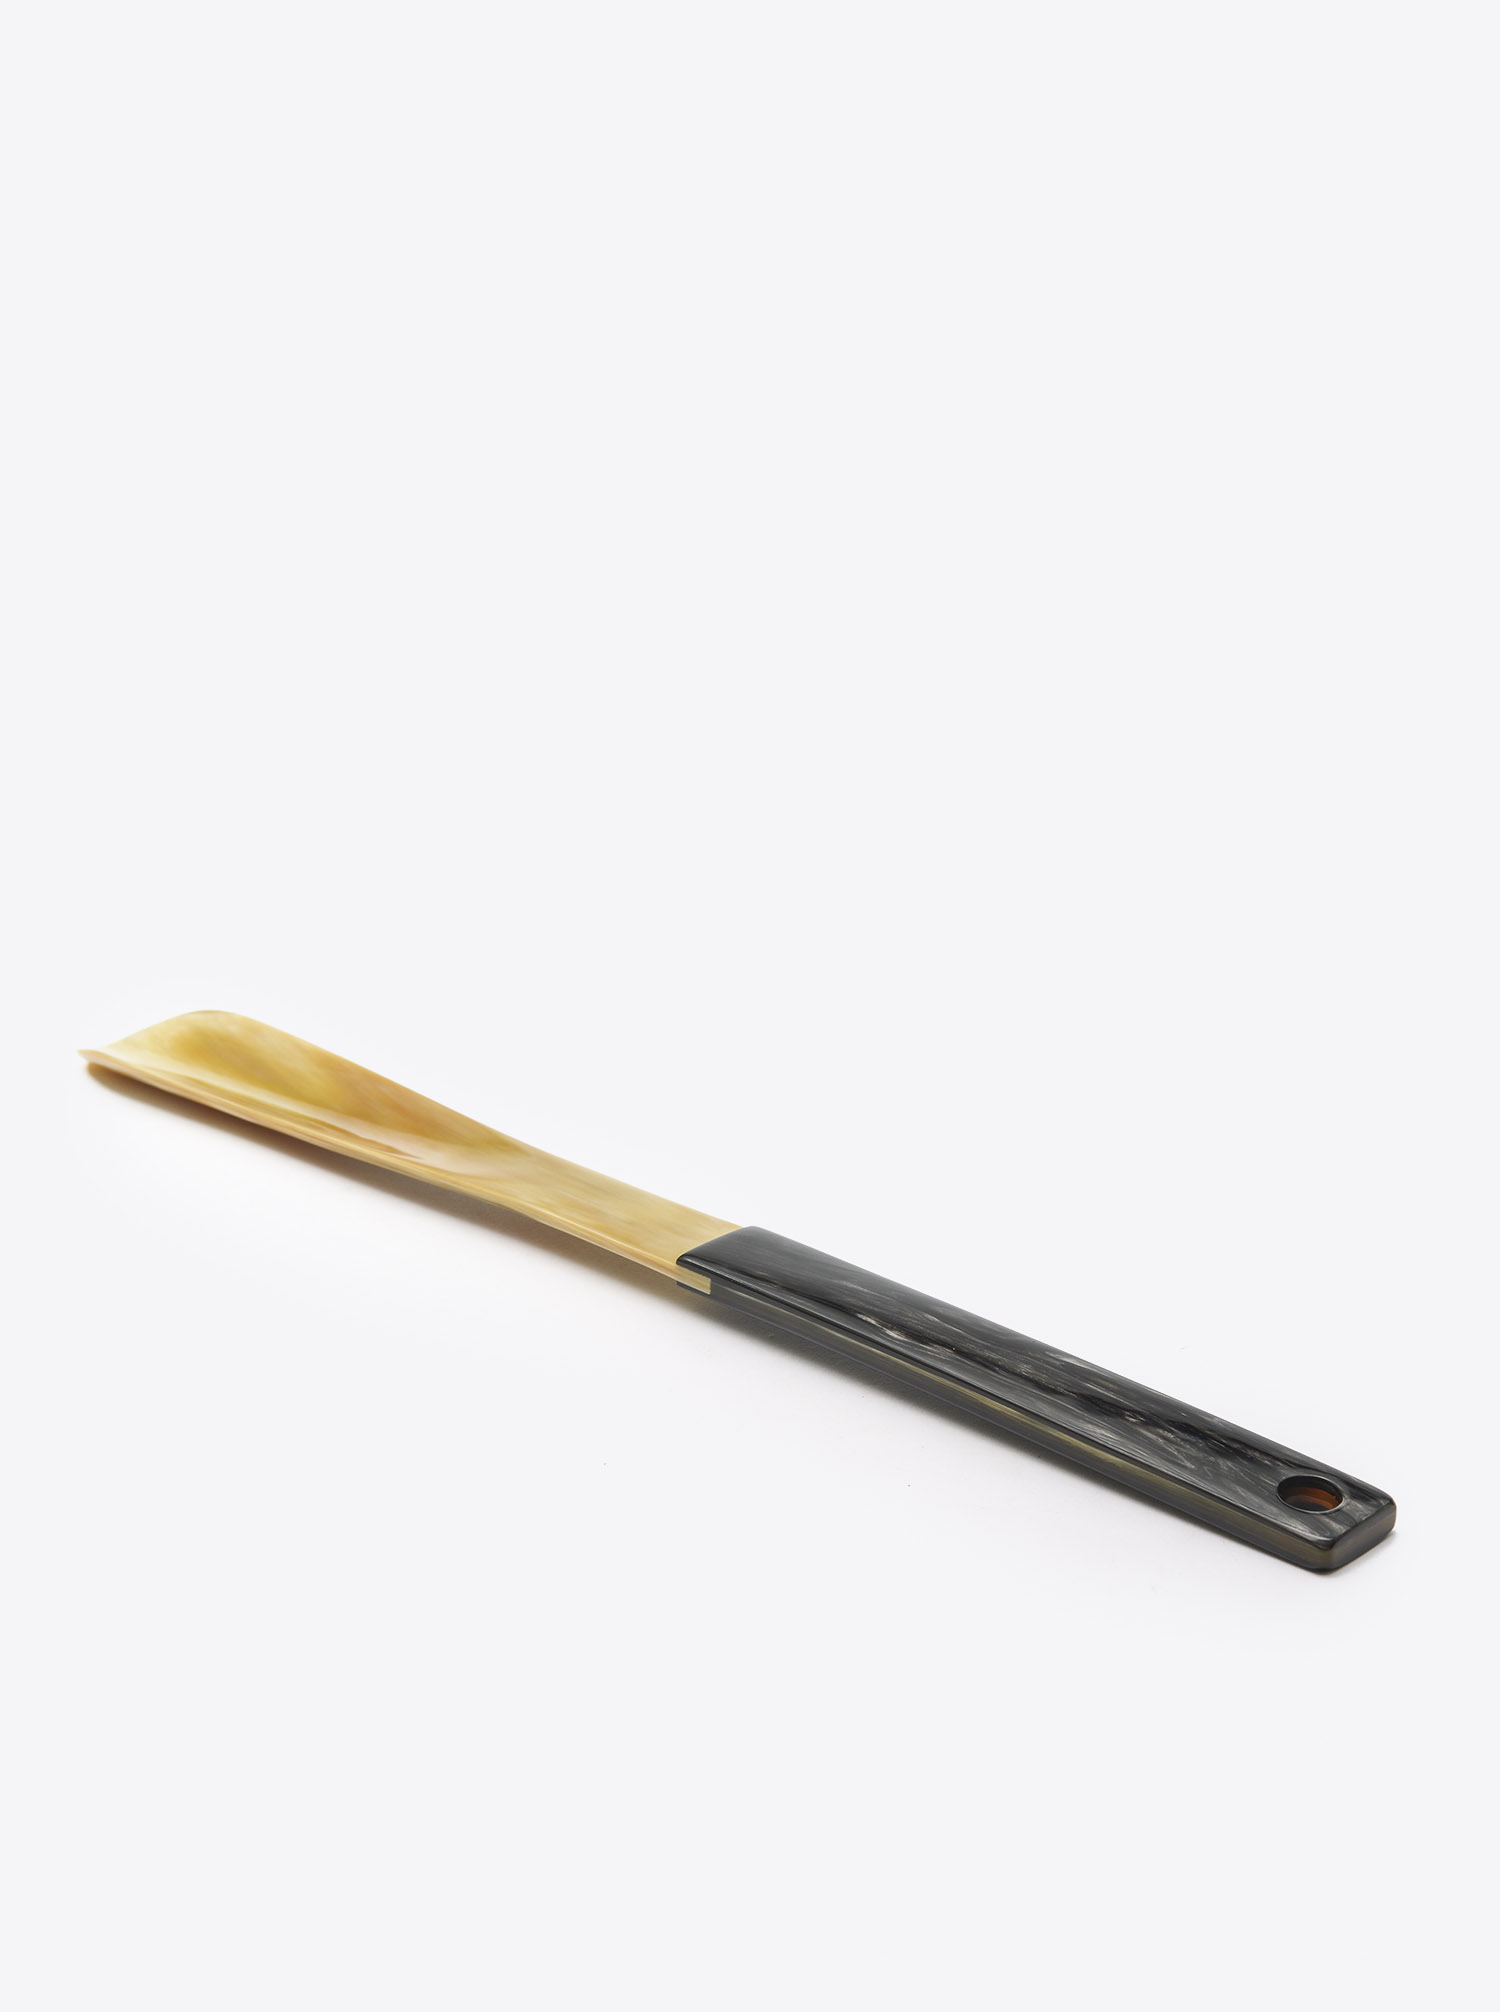 Shoehorn made of Horn light and dark handle